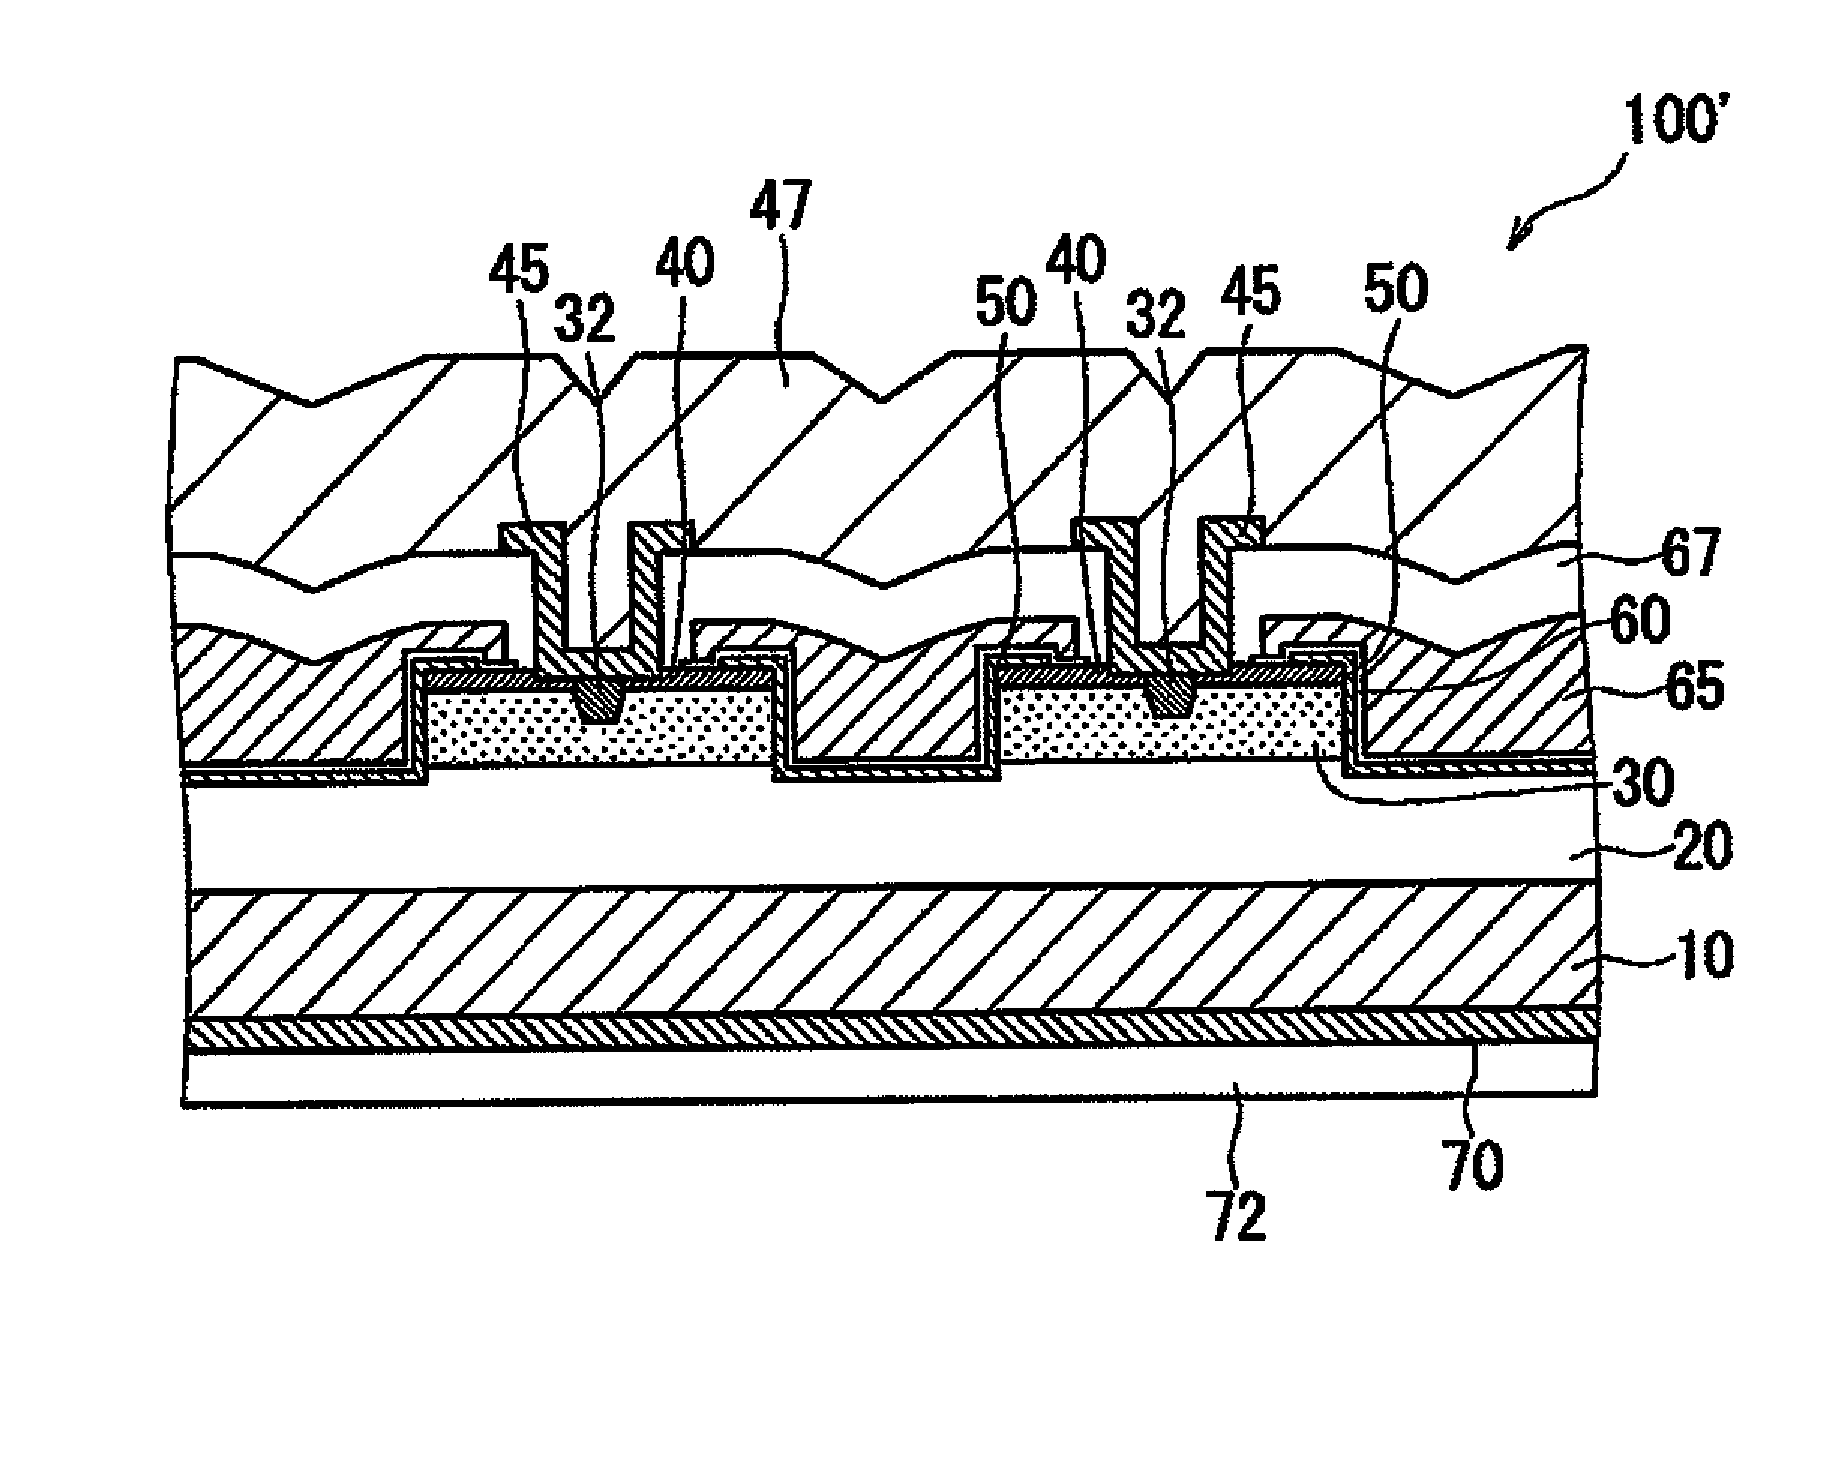 Semiconductor element, semiconductor device, and power converter